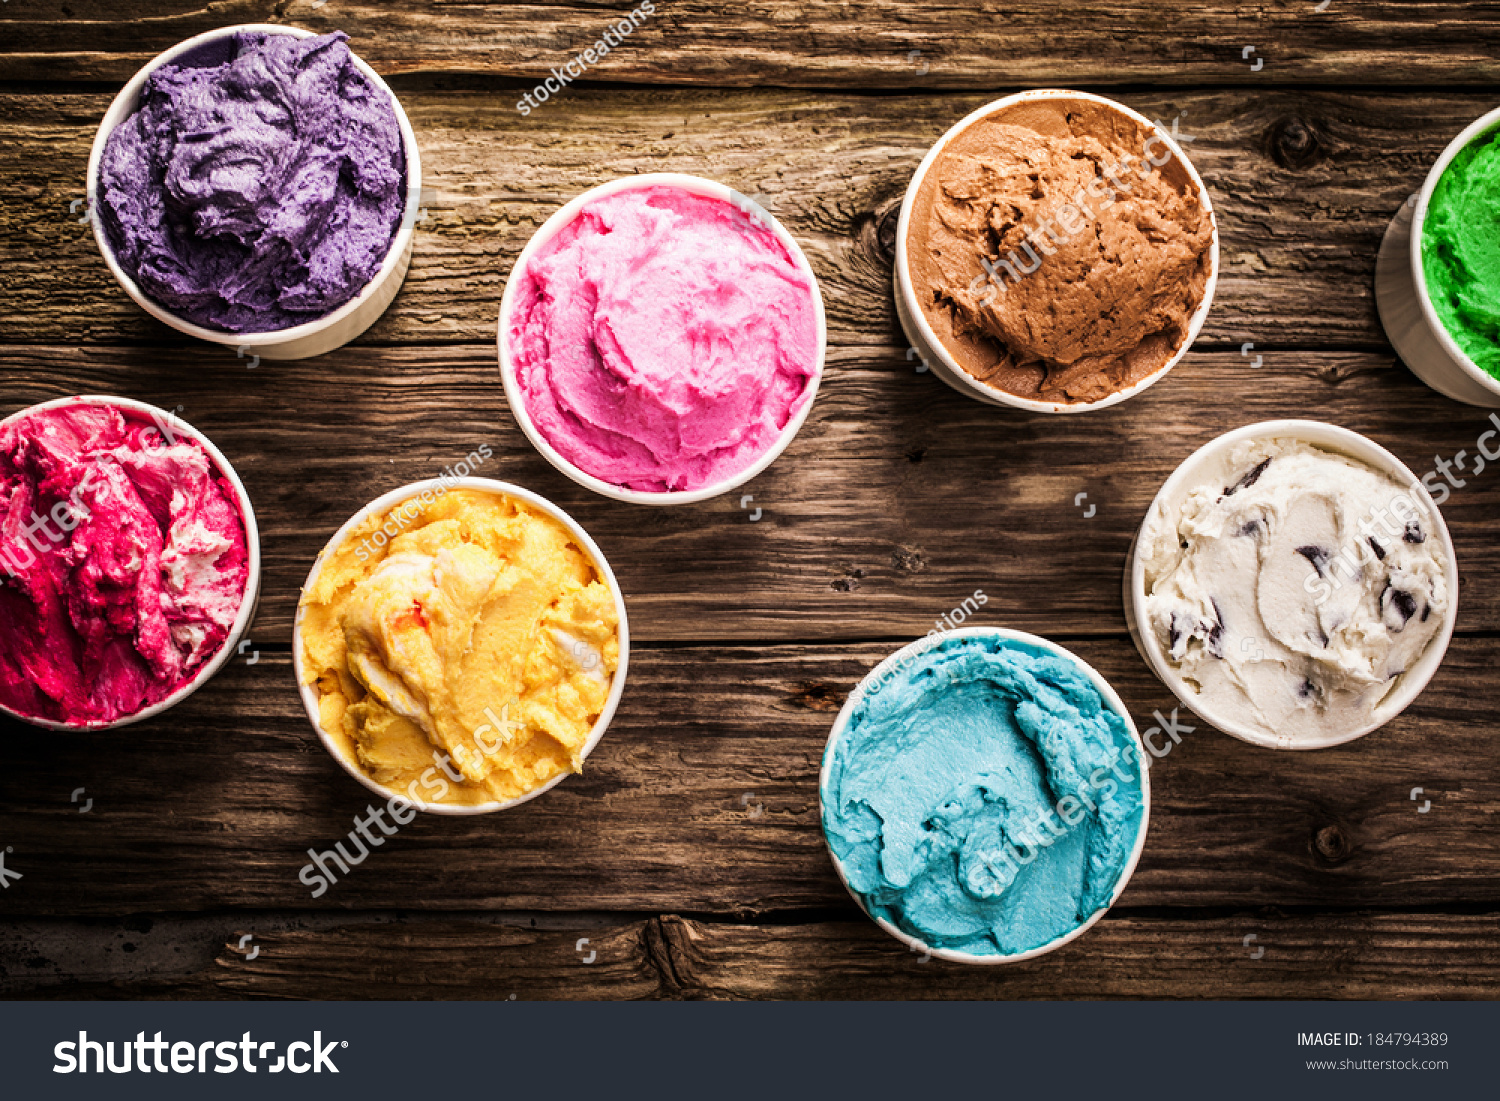 Selection of gourmet flavours of Italian ice cream in vibrant colors served in individual plastic tubs on an old rustic wooden table in an ice cream parlor, overhead view #184794389